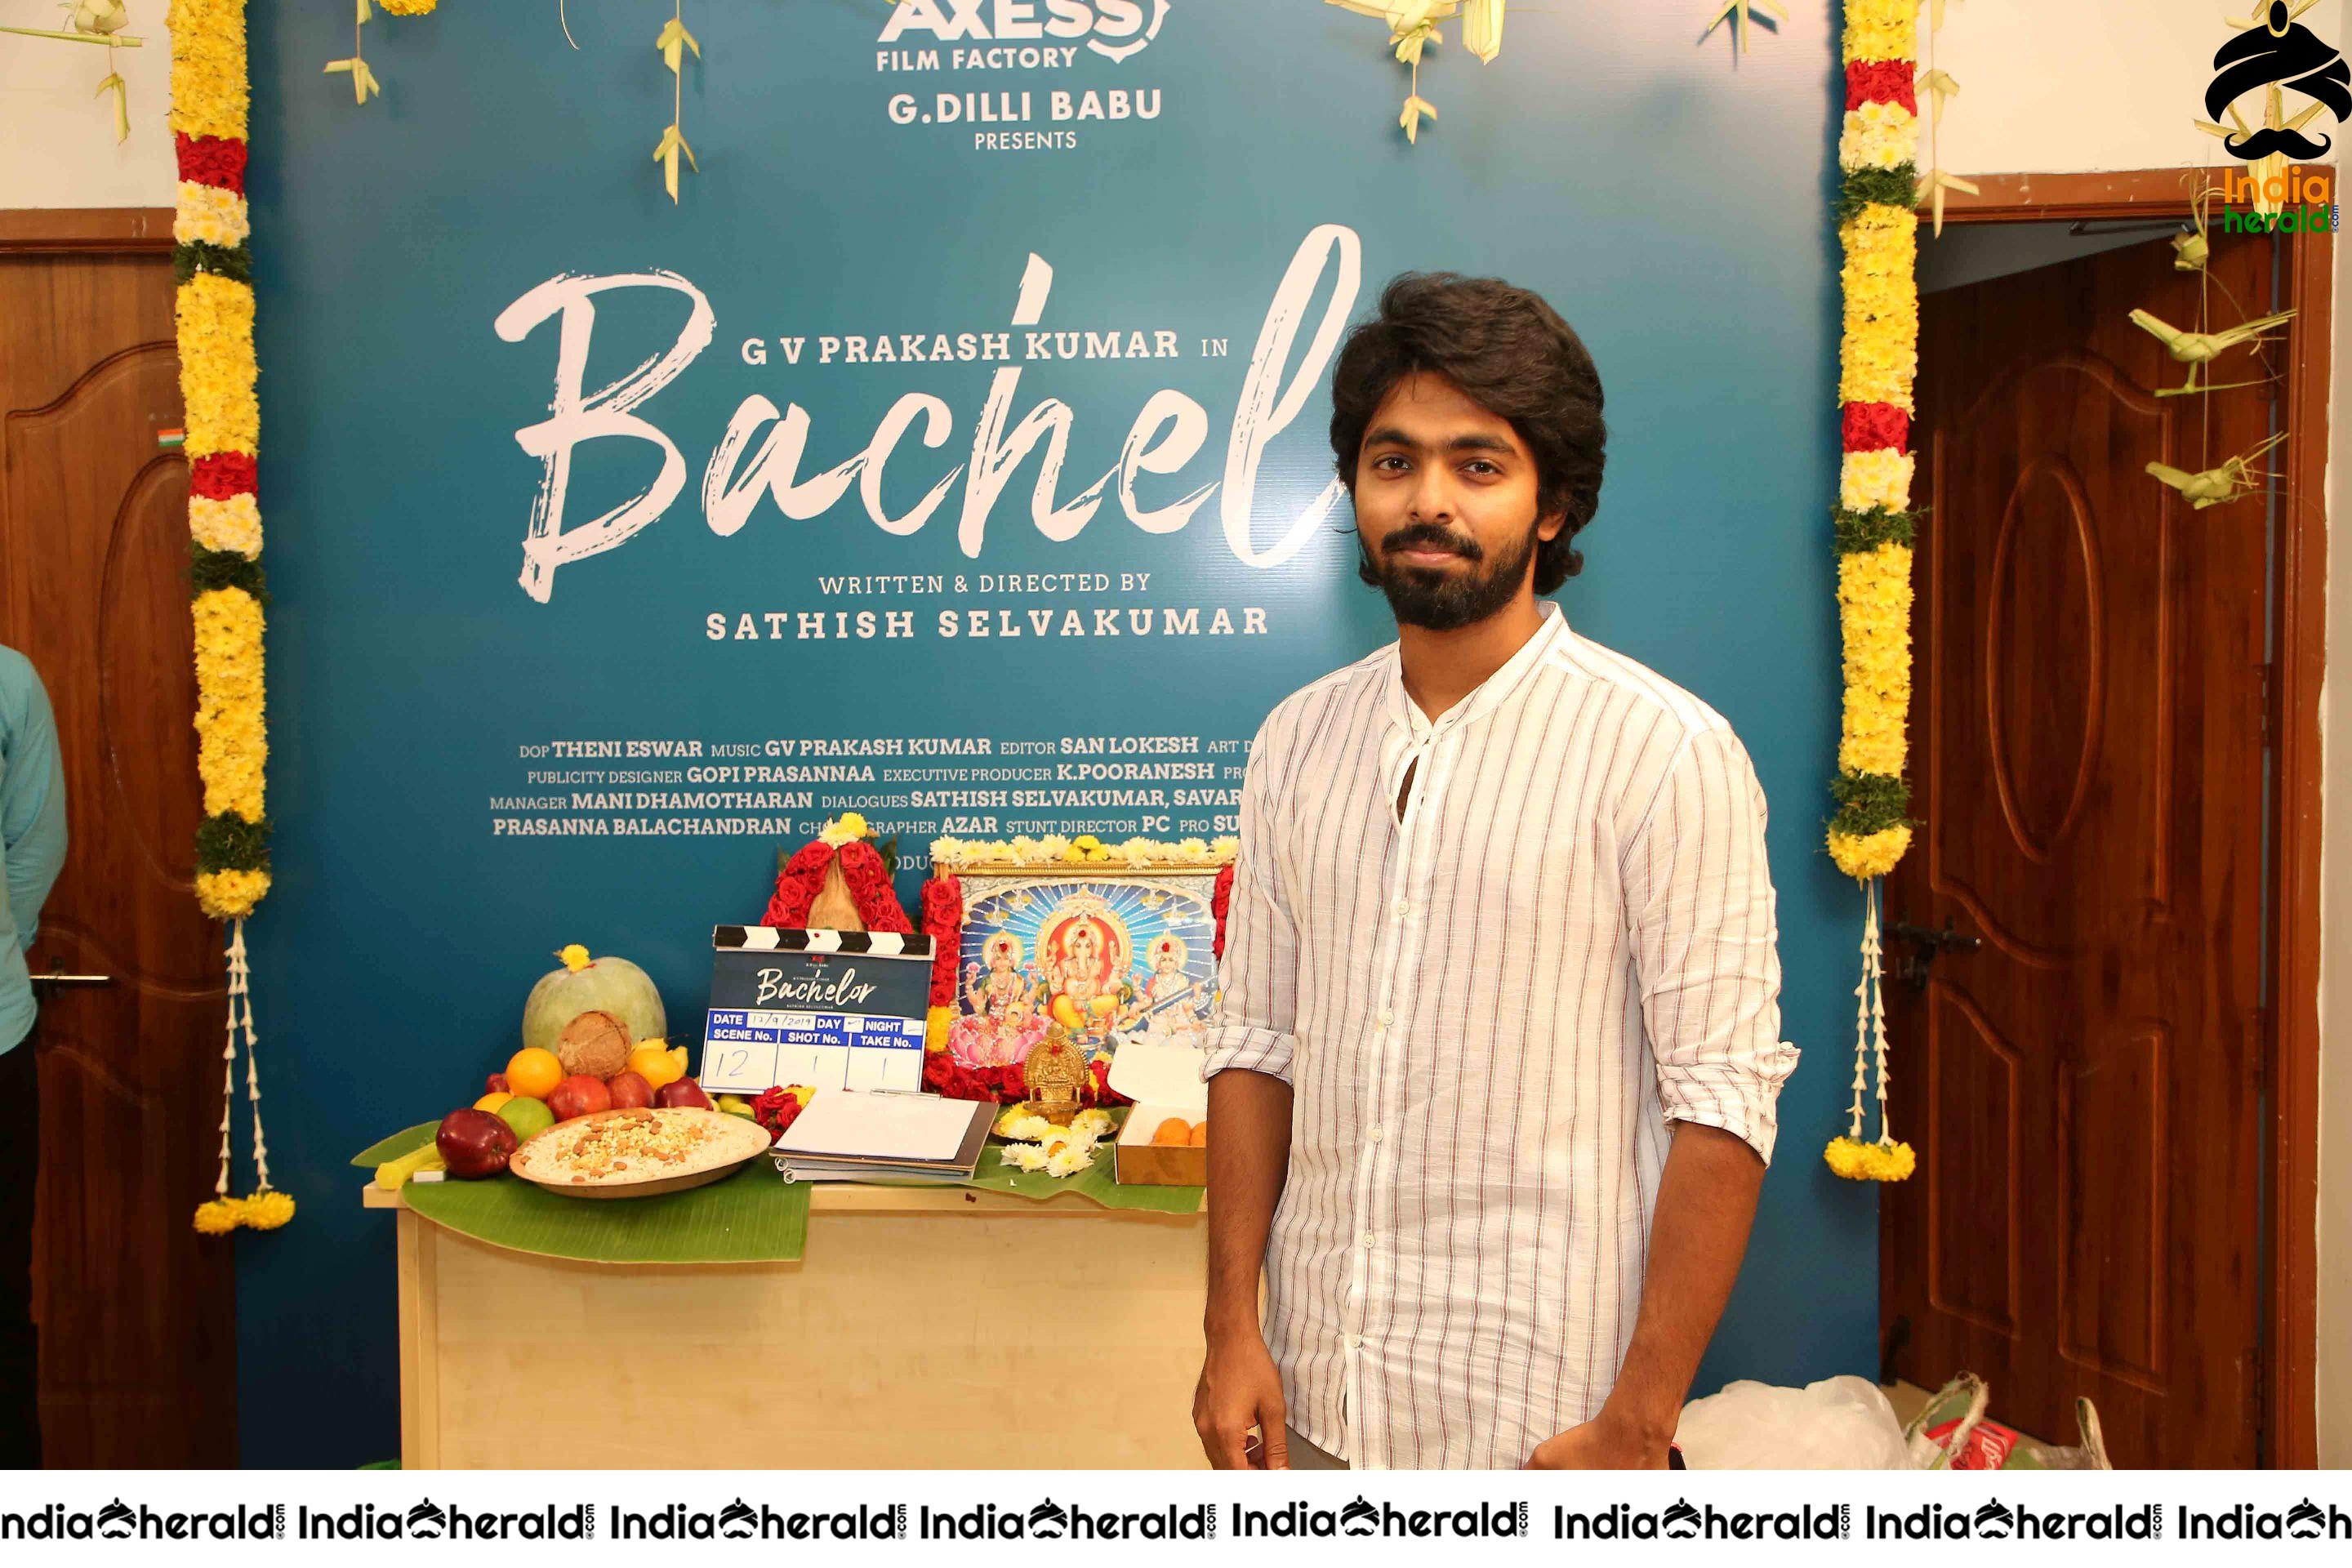 GV Prakash In Bachelor Movie Launched With A formal pooja